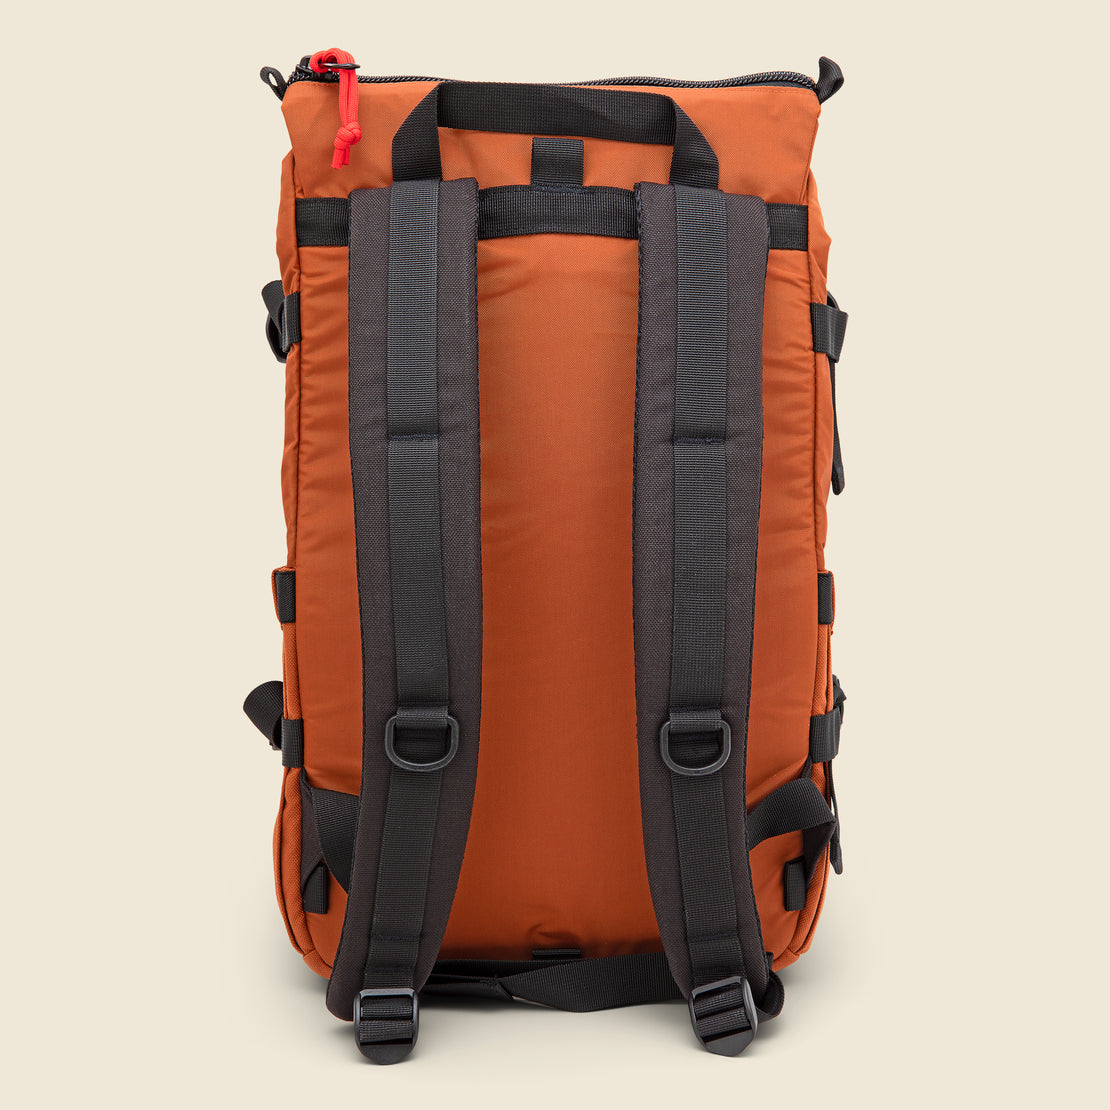 Rover Pack Classic - Clay - Topo Designs - STAG Provisions - Accessories - Bags / Luggage